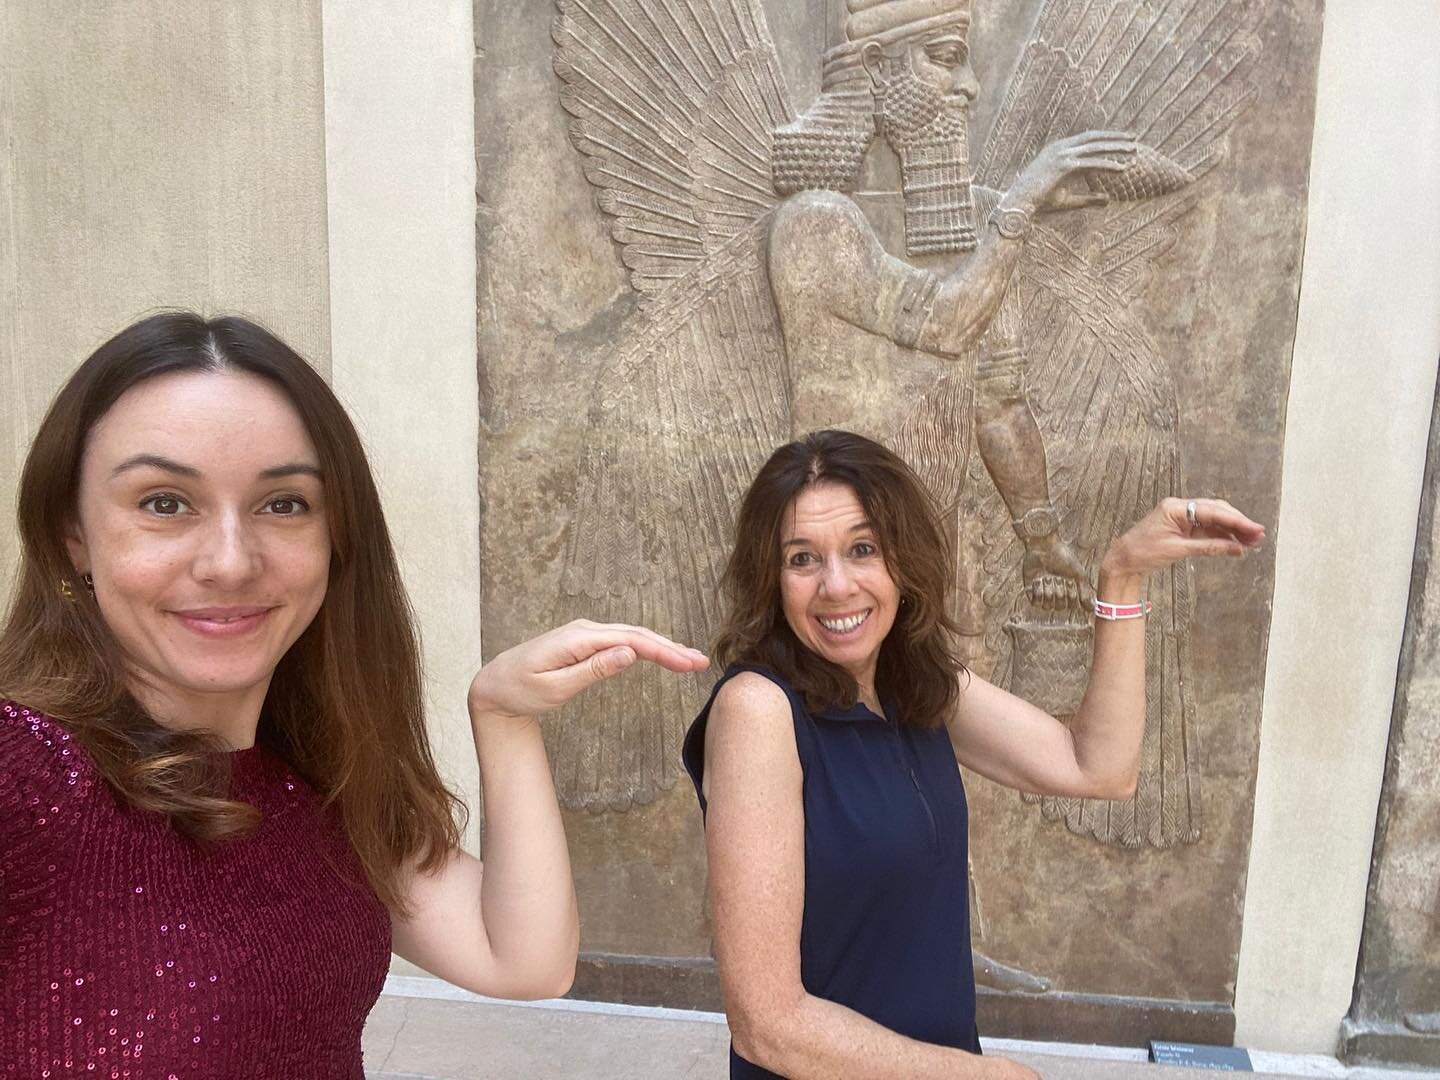 Walk like an Assyrian!

Two weeks ago I was in Paris with my daughter, Mari. Of course we went to the Louvre, where the Ancient Near Eastern art pulls me like a magnet (au revoir, Mona Lisa). Here we are imitating the apkallu &ldquo;winged genie&rdqu